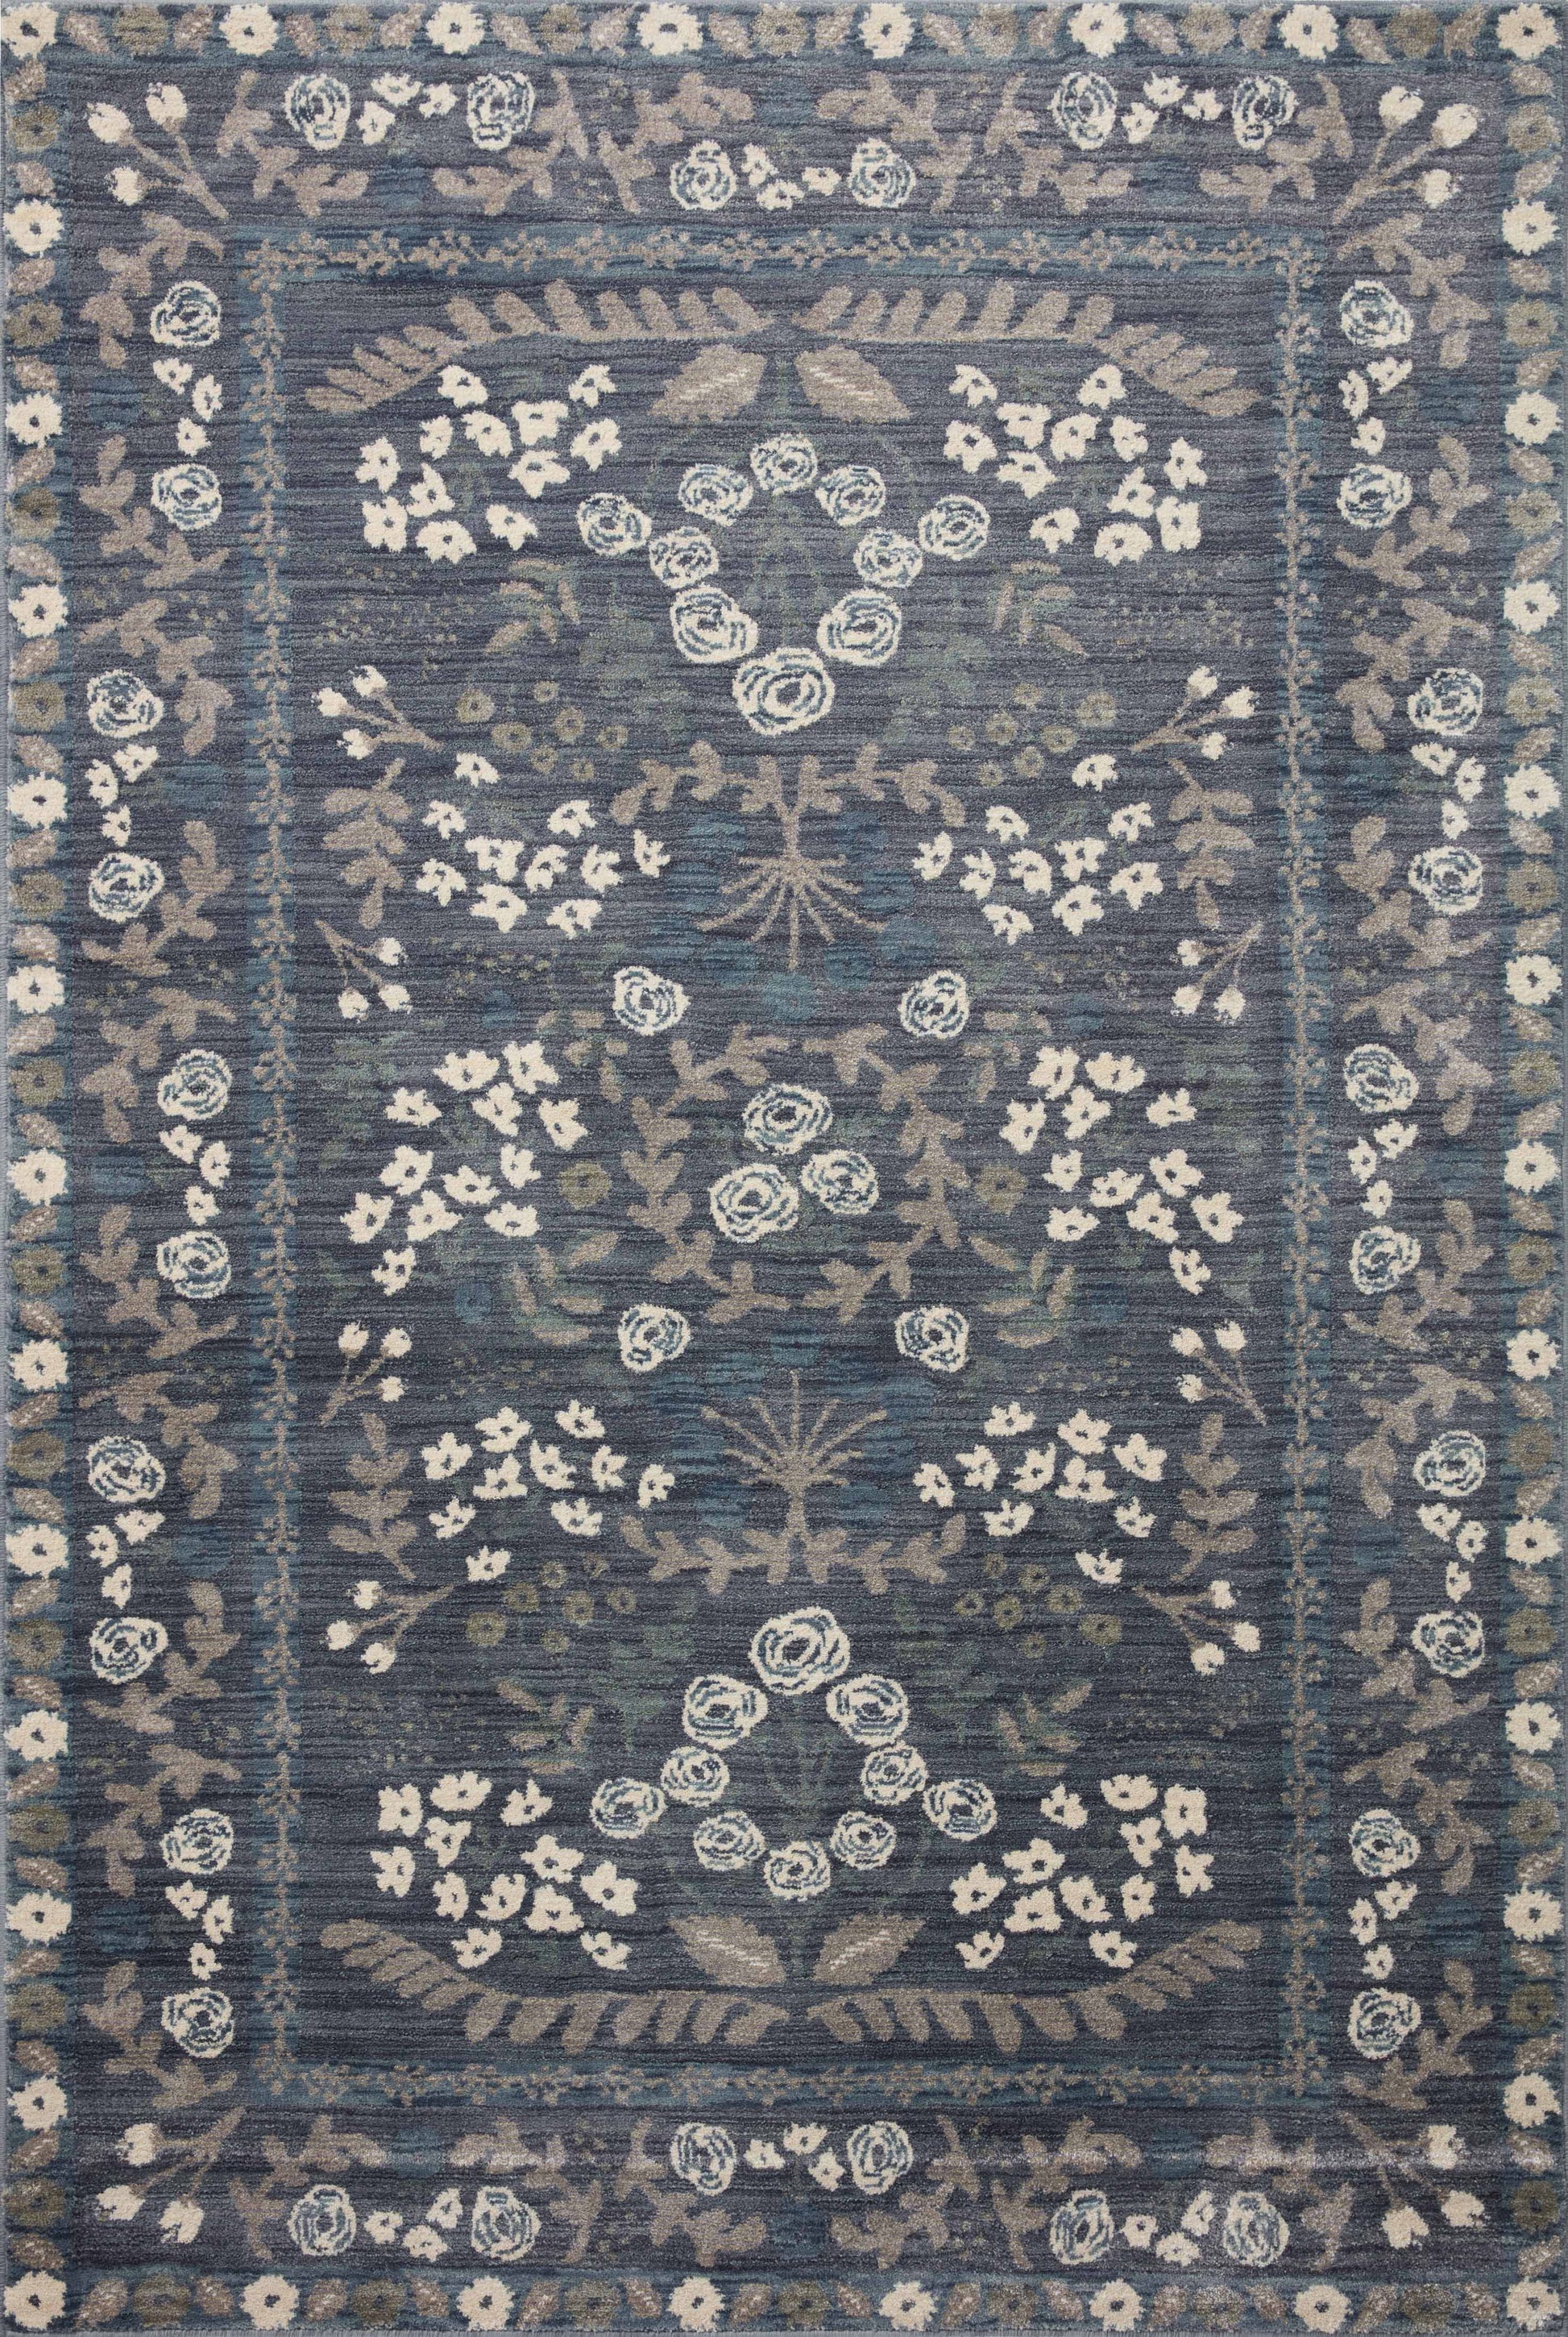 A picture of Loloi's Fiore rug, in style FIO-01, color Navy Grey